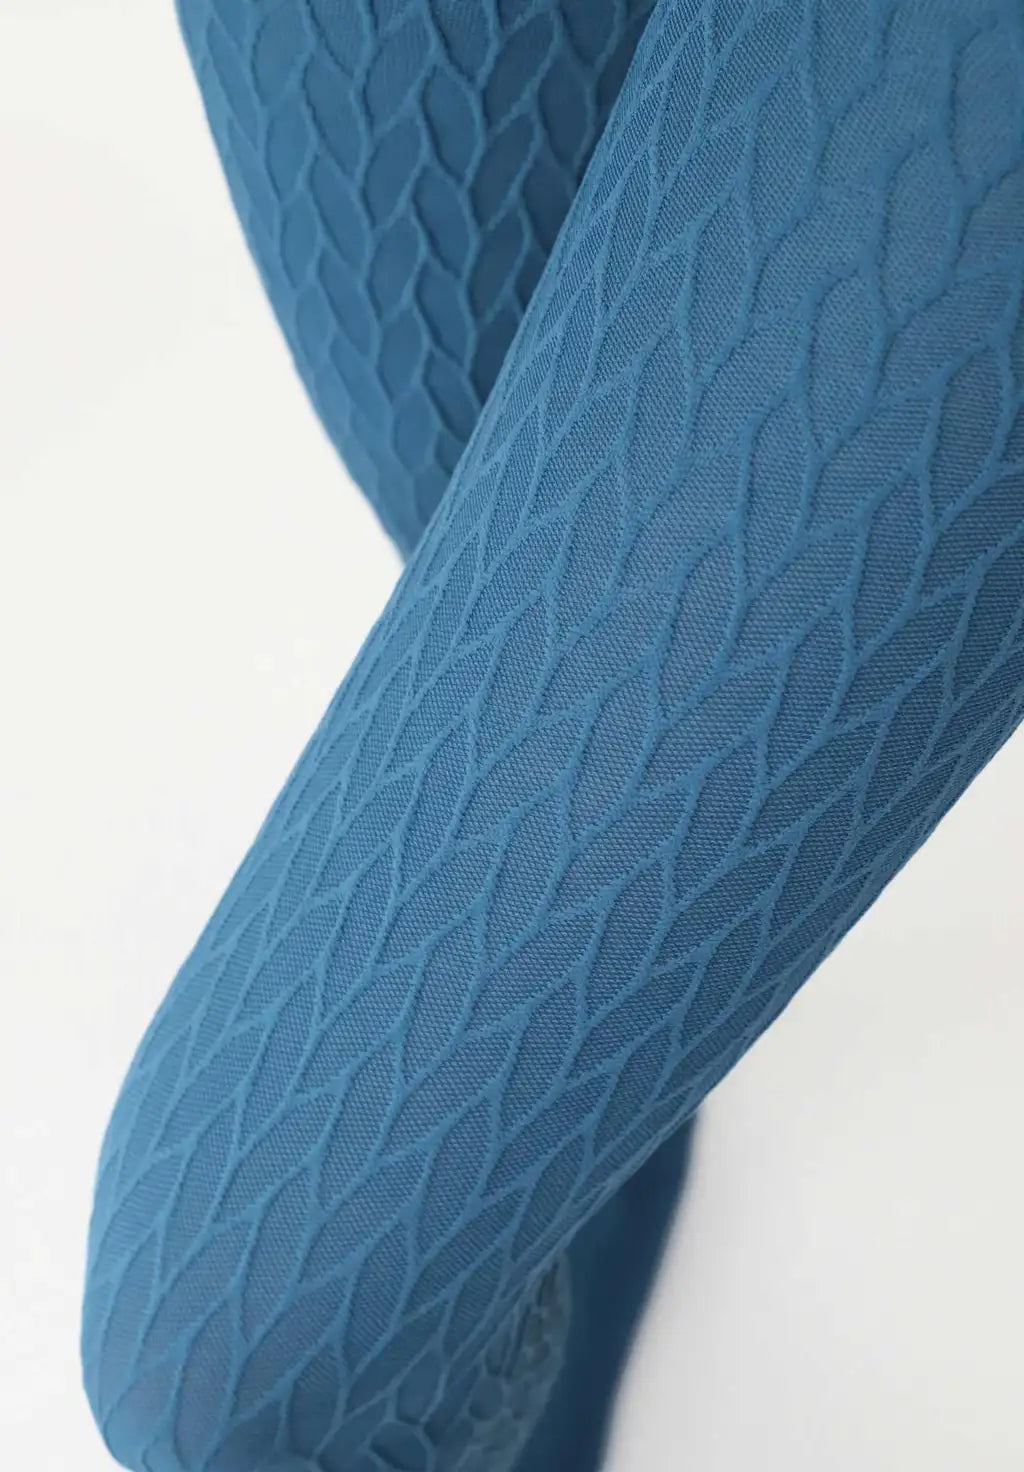 Oroblù Winding Collant - Teal blue opaque fashion tights with an all over subtle braided cable knit style textured pattern